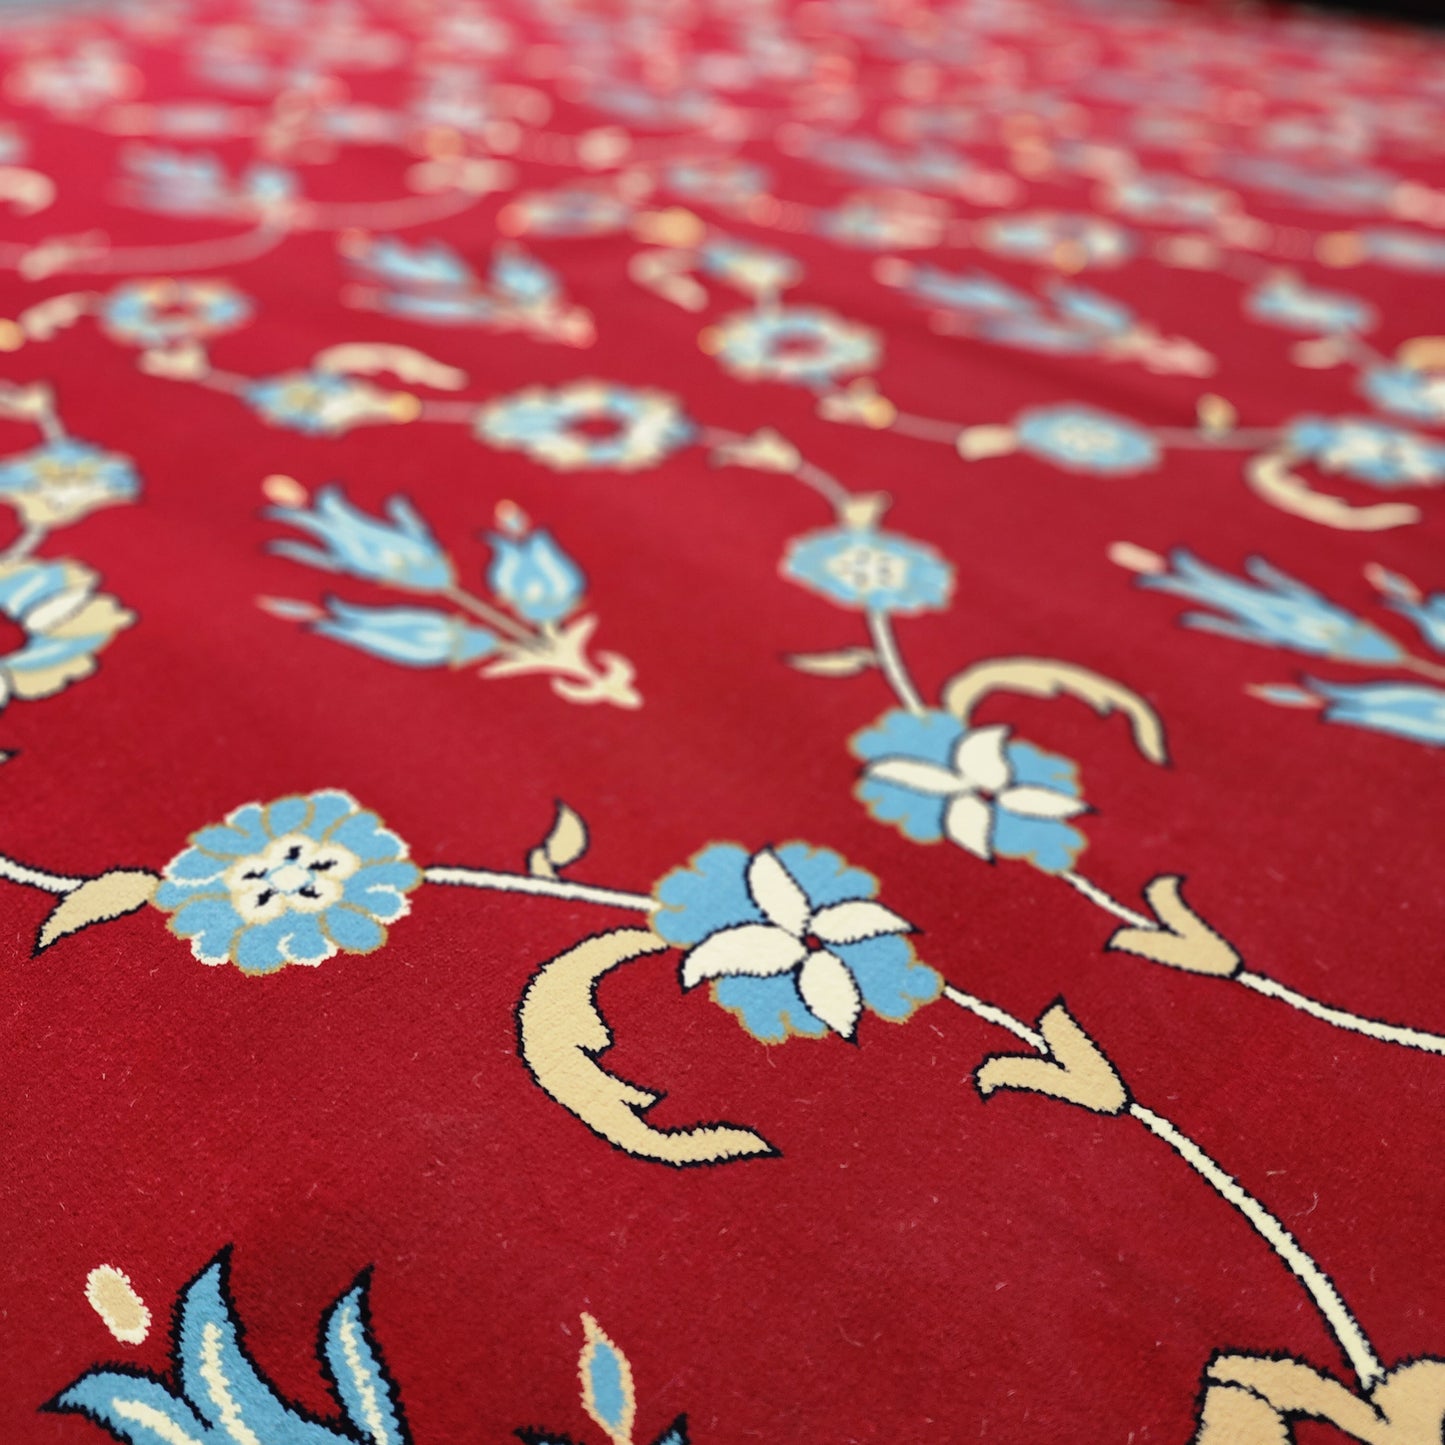 ISTANBUL BLUE MOSQUE Red Floral Mosque & Masjid Carpet